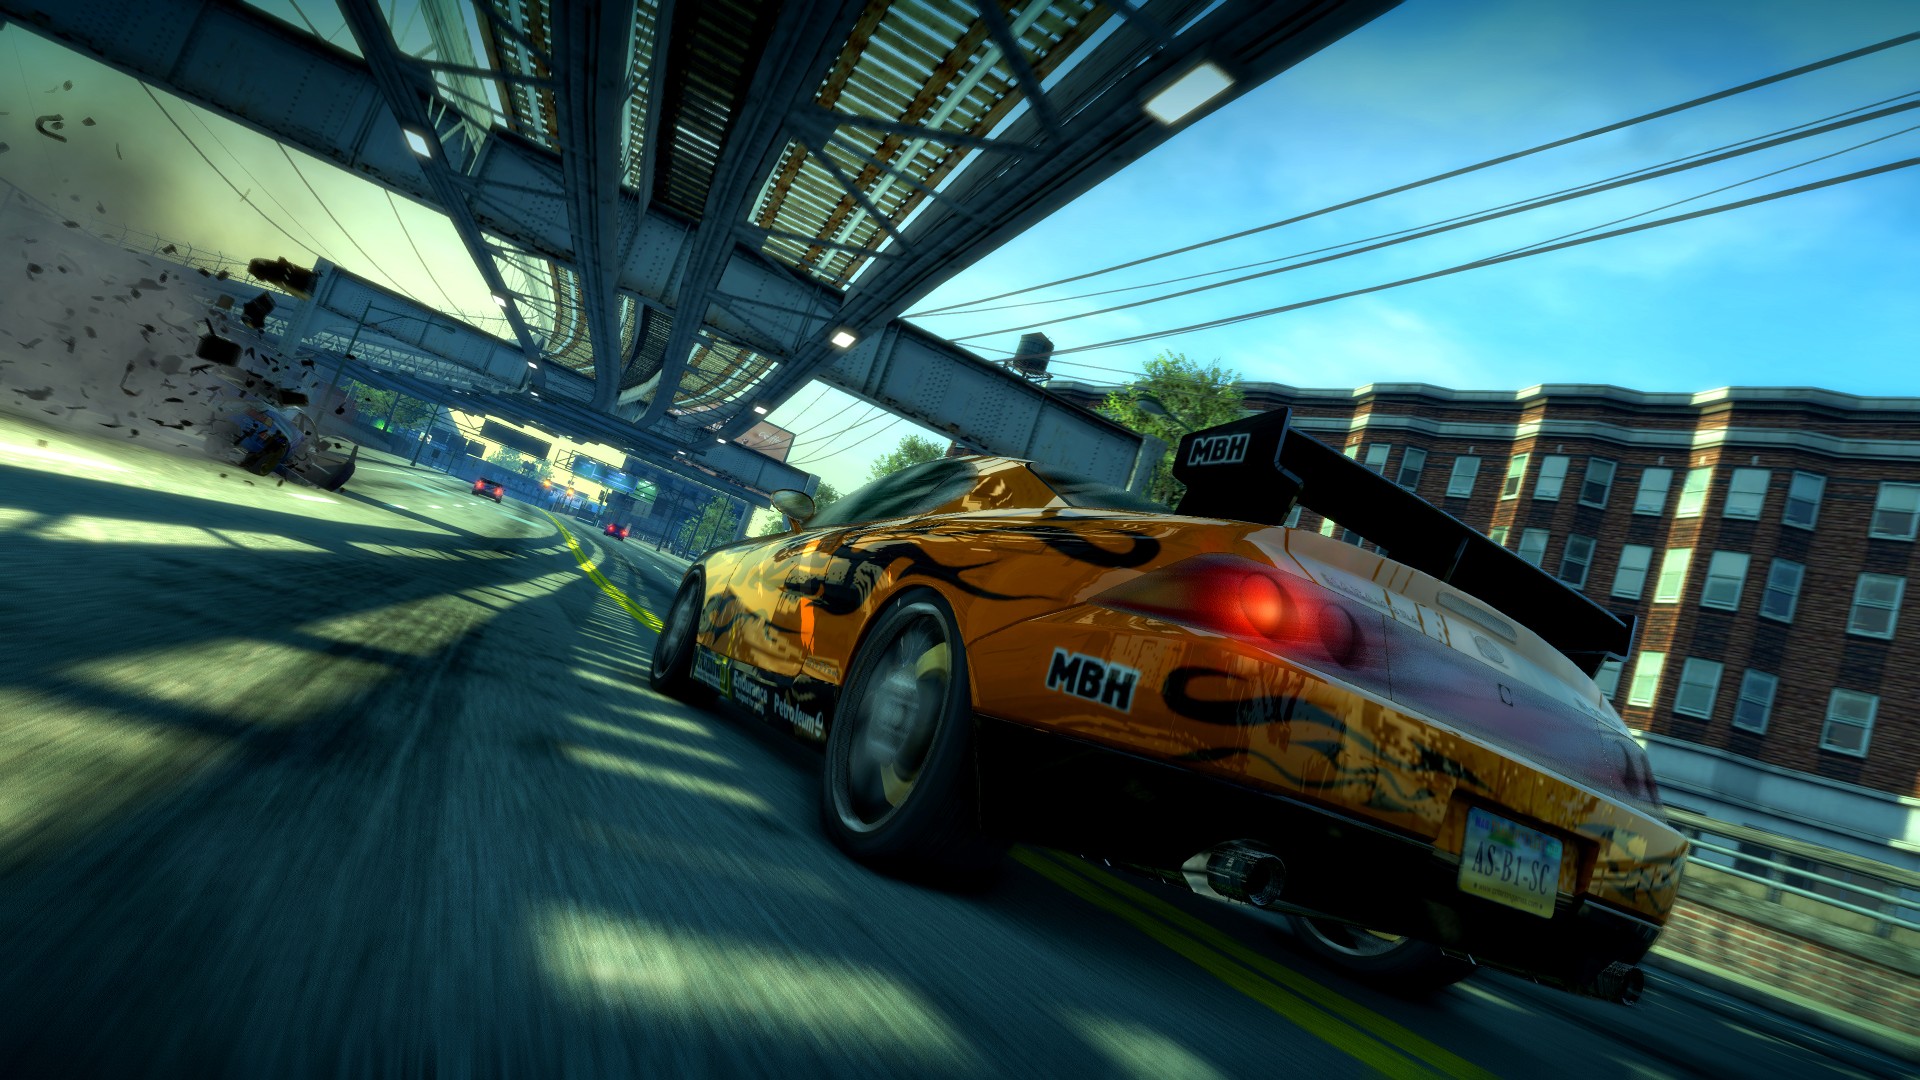 Best Racing Games for PC in 2022